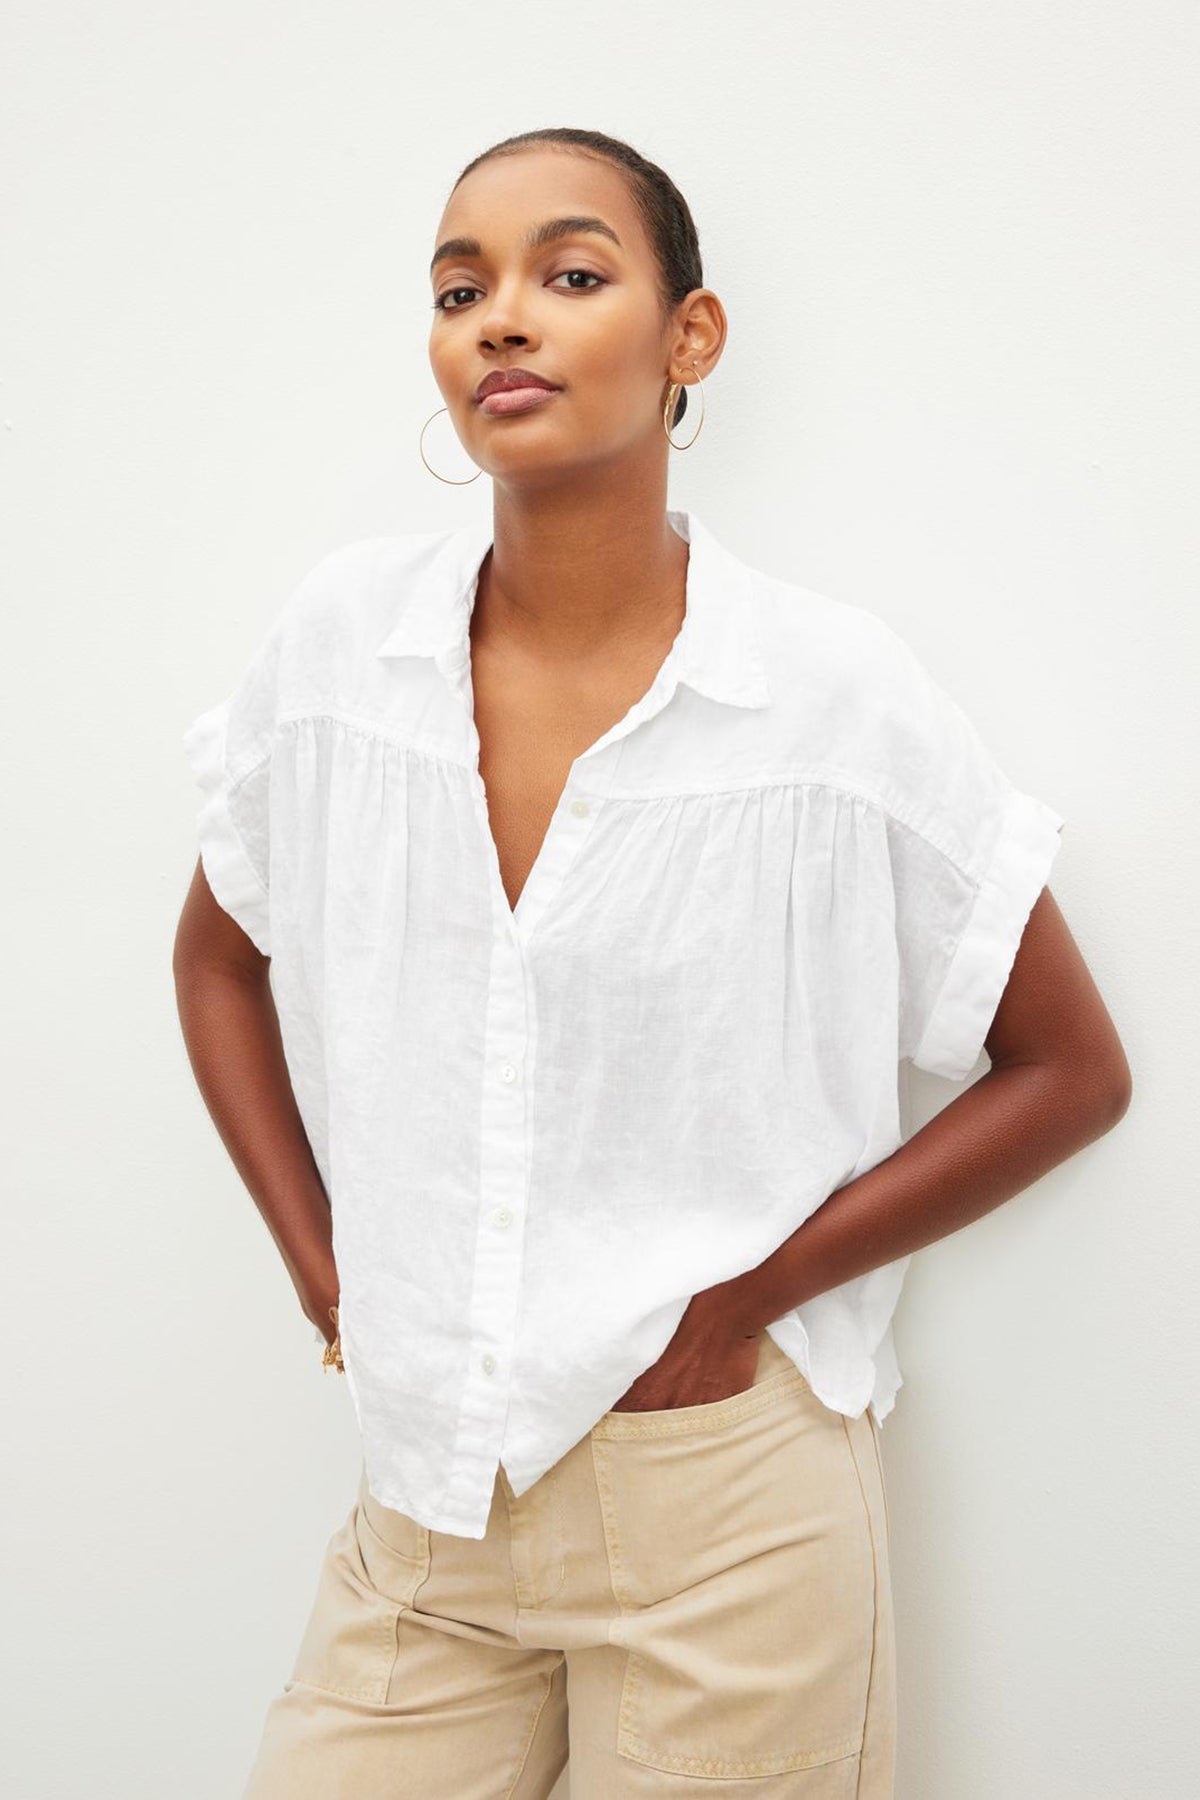 A confident woman posing in a Velvet by Graham & Spencer ARIA LINEN BUTTON FRONT TOP and beige pants against a plain background.-36443424522433